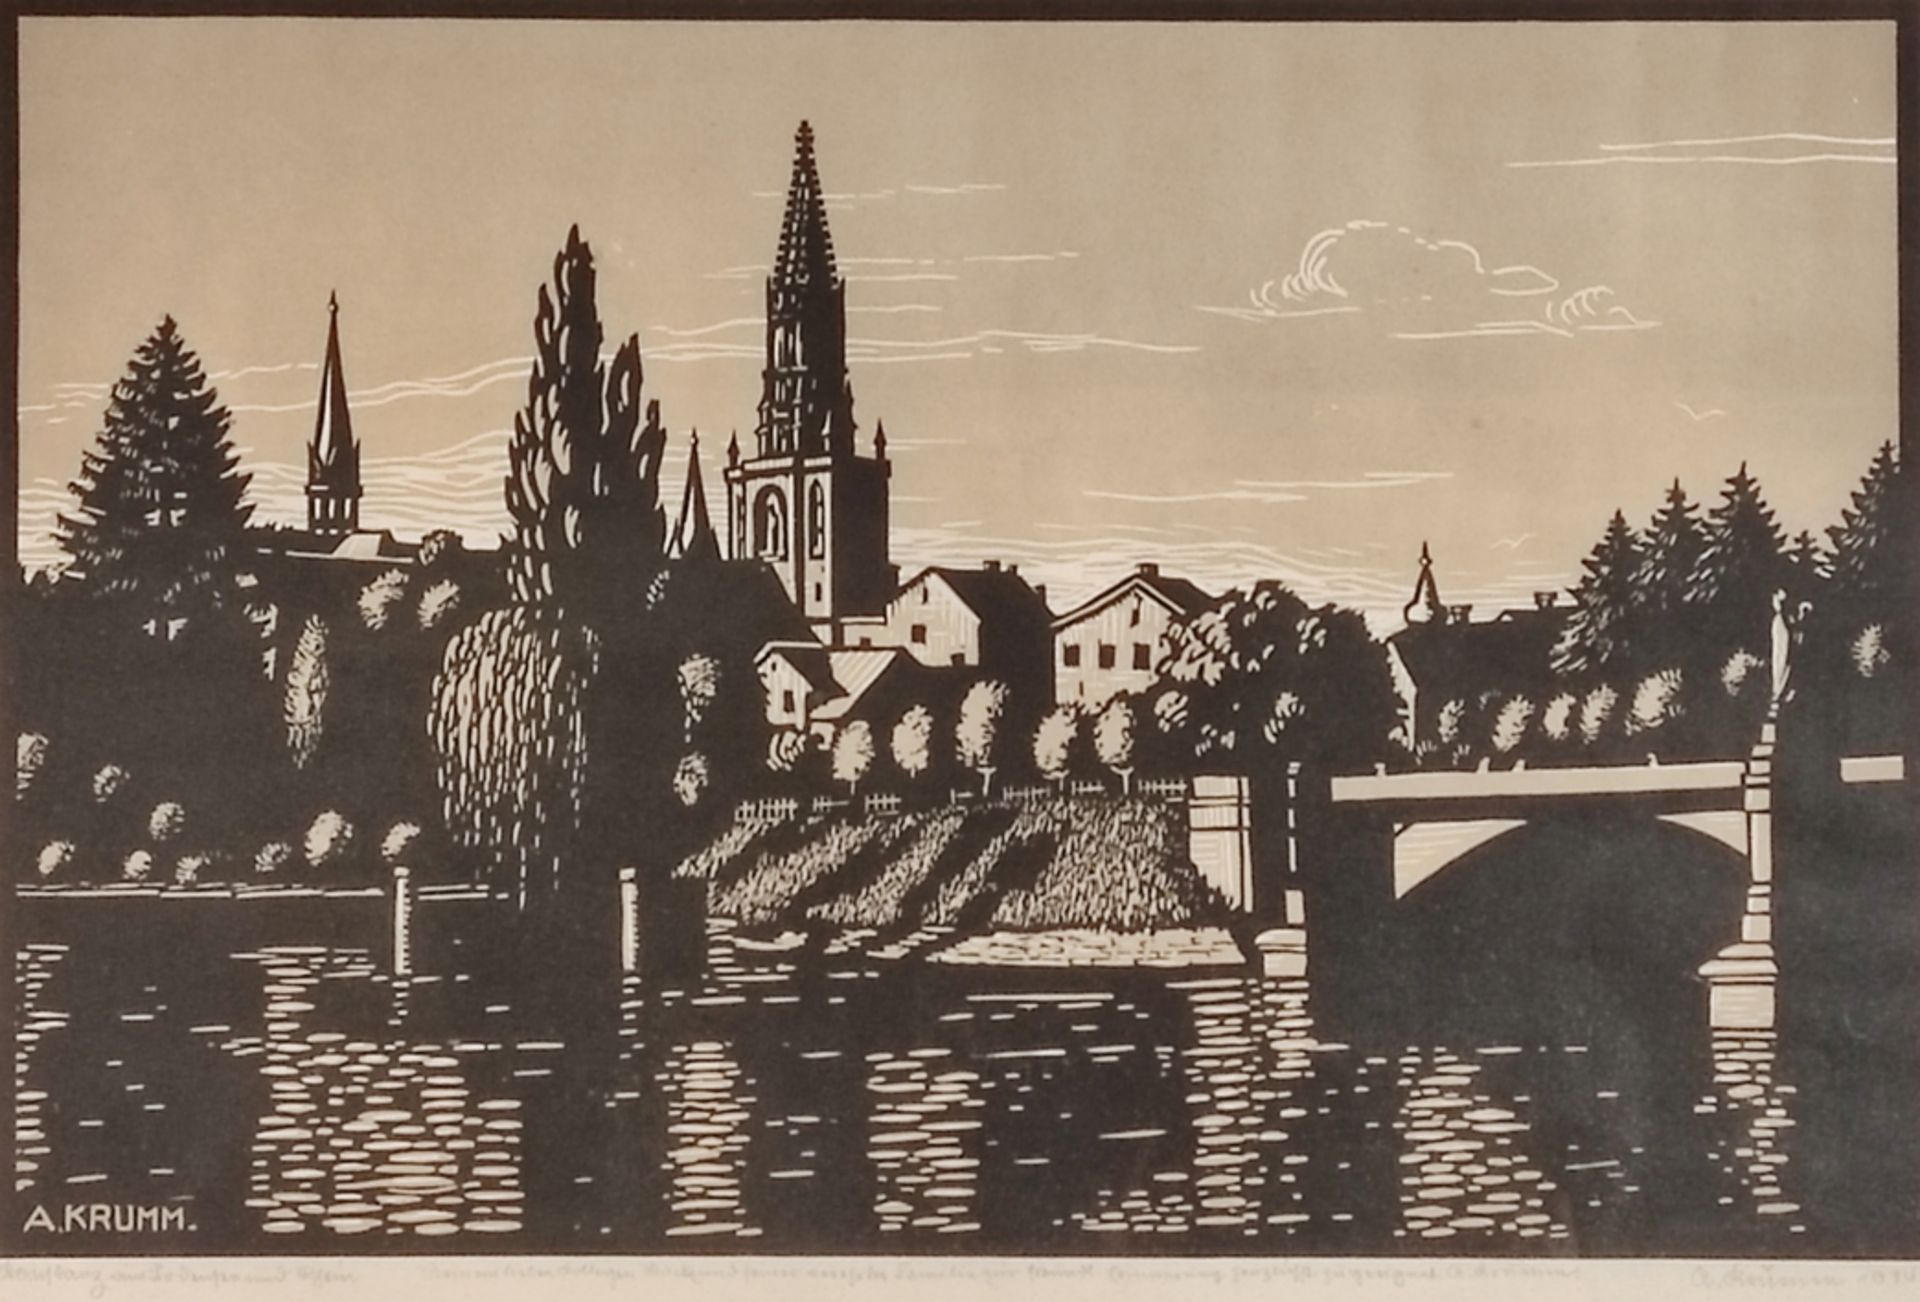 Krumm, A. (1st half 20th century) "View of Constance", with old bridge over the Rhine, dedication t